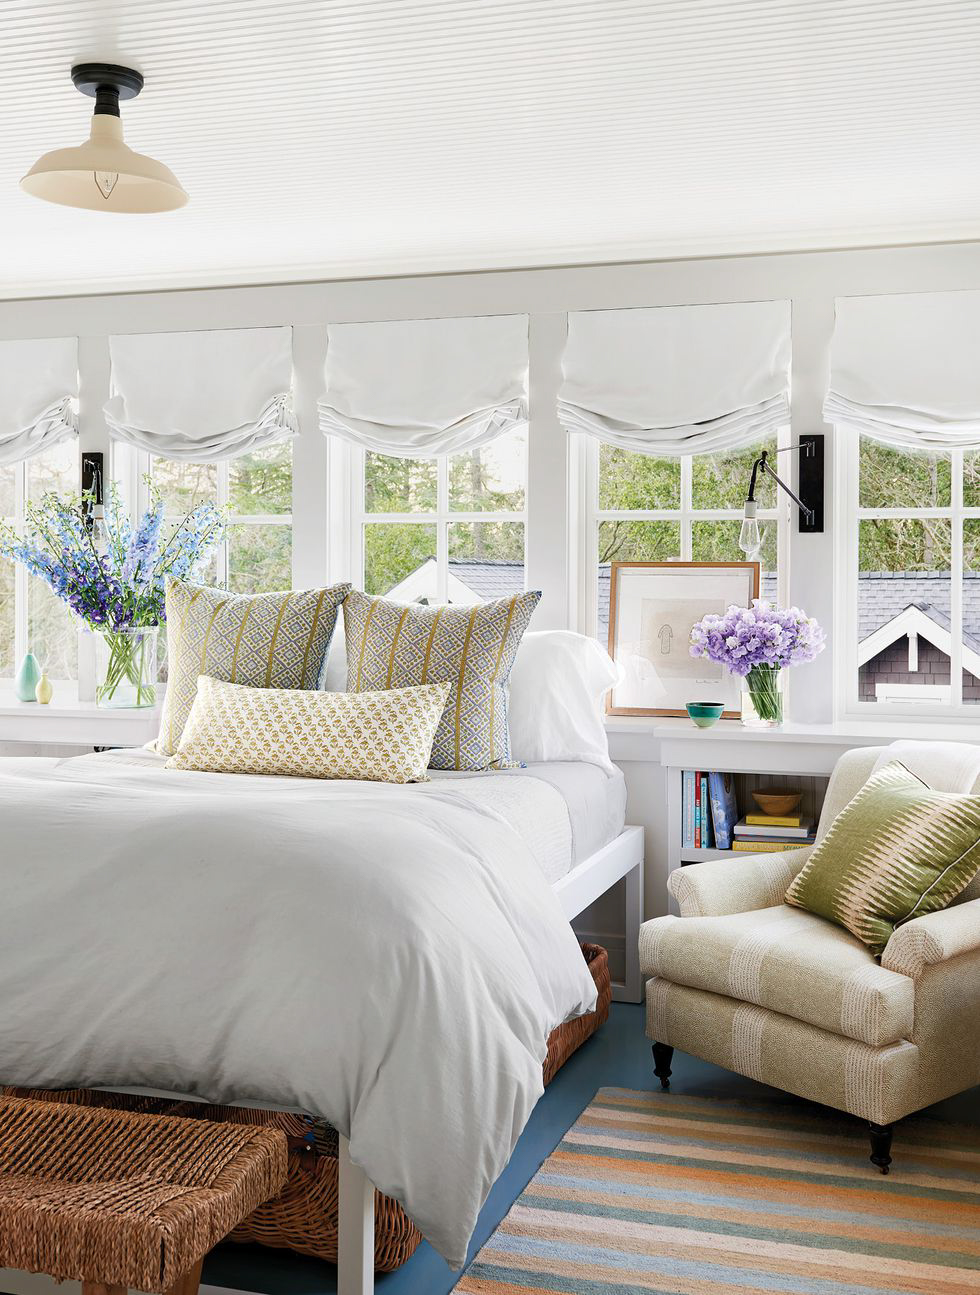 mark sikes portola project bedroom from More Beautiful featured on Cindy Hatterlseys Blog